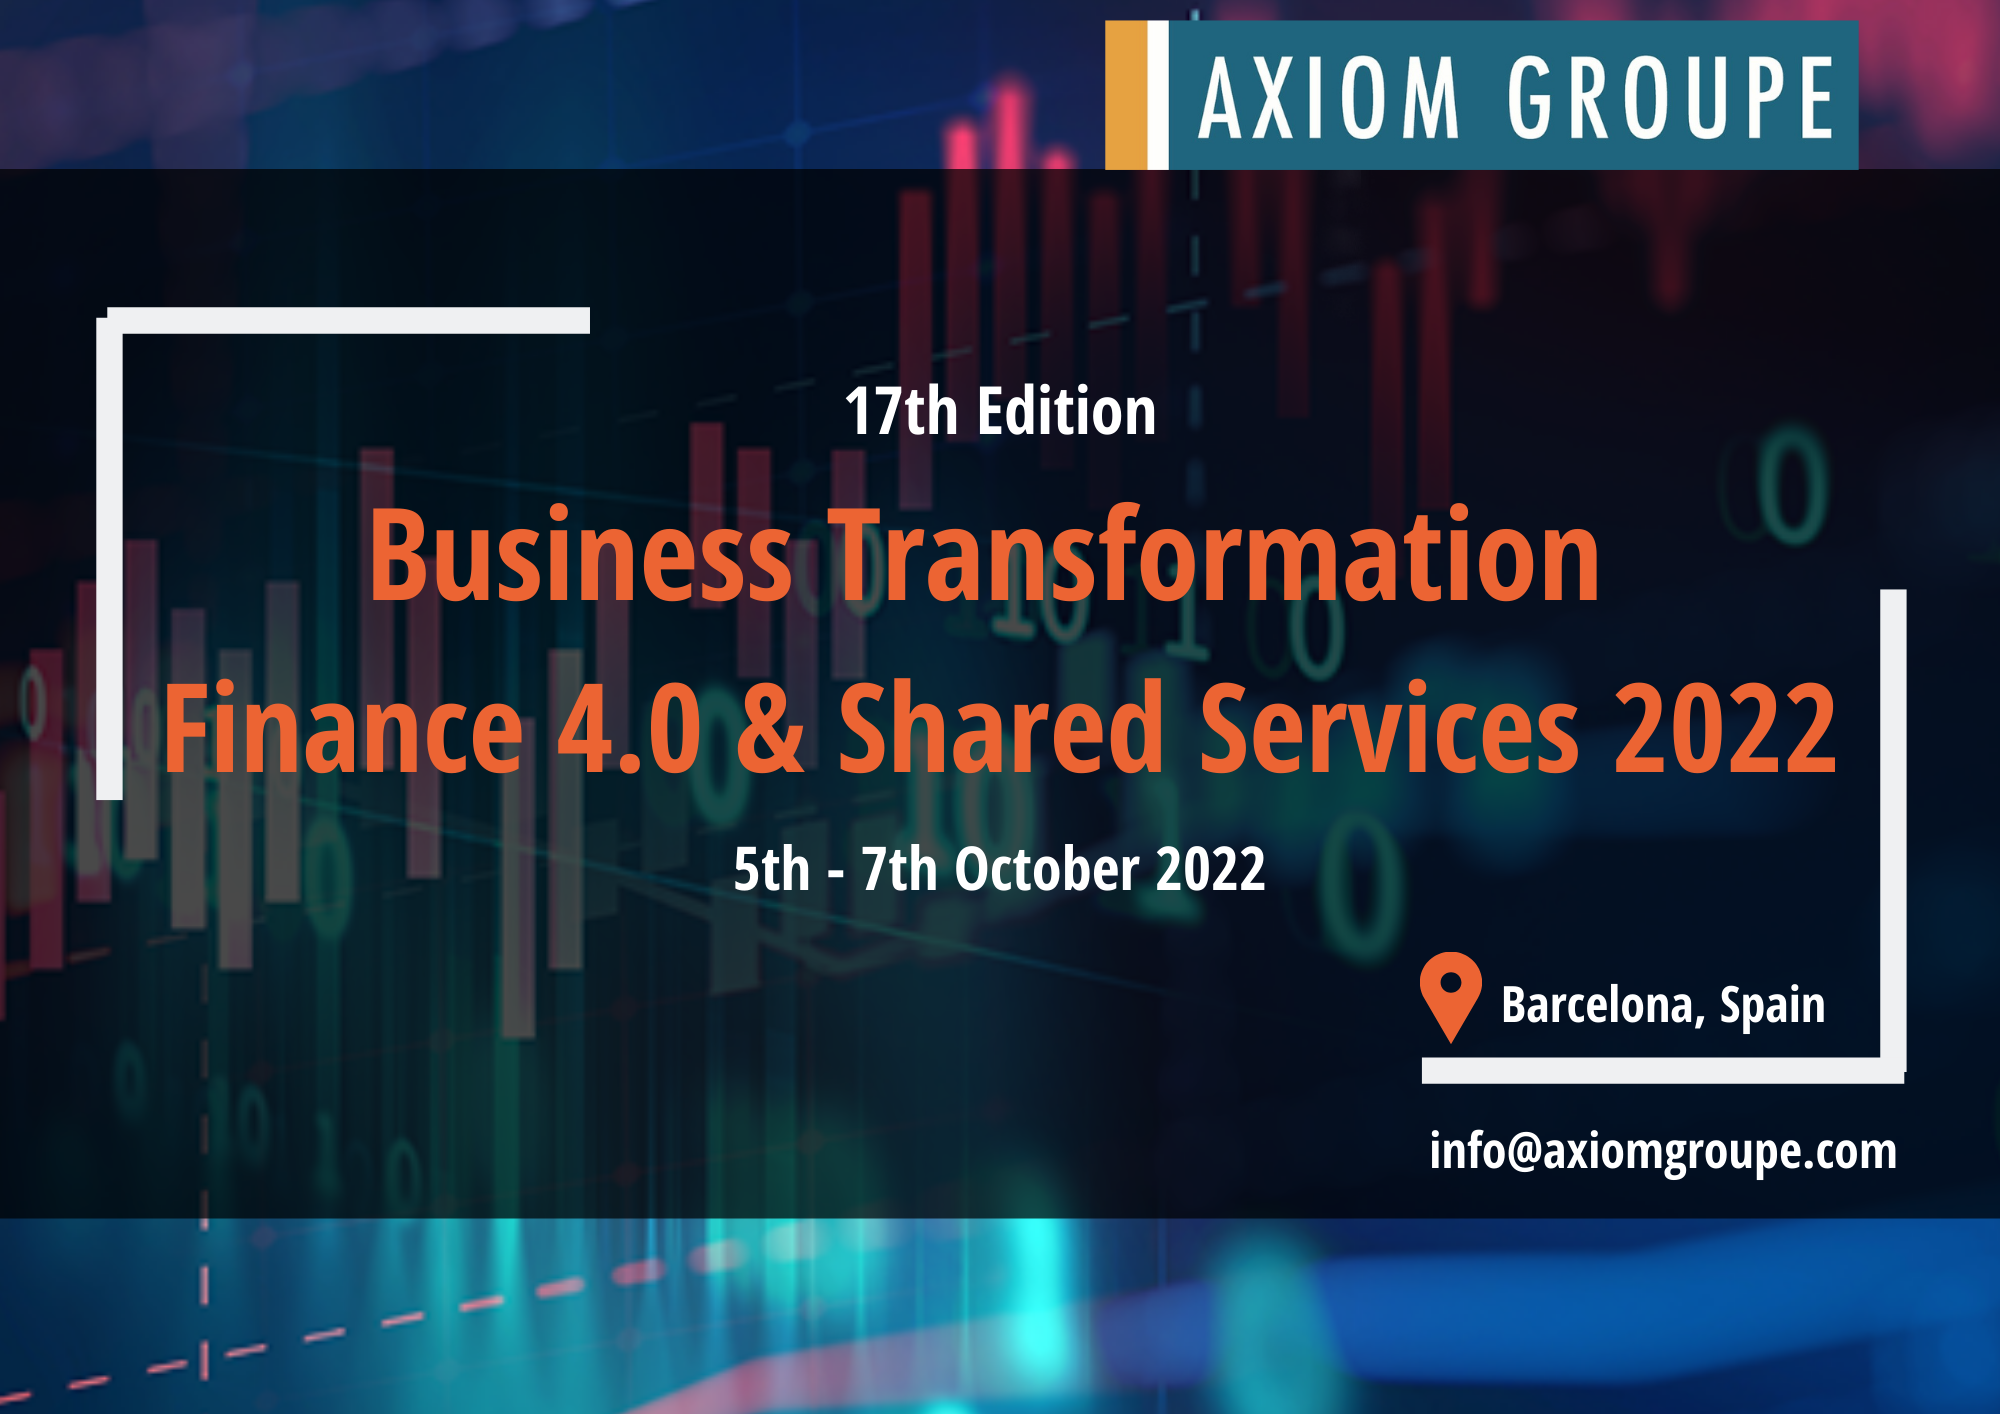 Business Transformation Finance 4.0 & Shared Services 2022 organized by Axiom Groupe